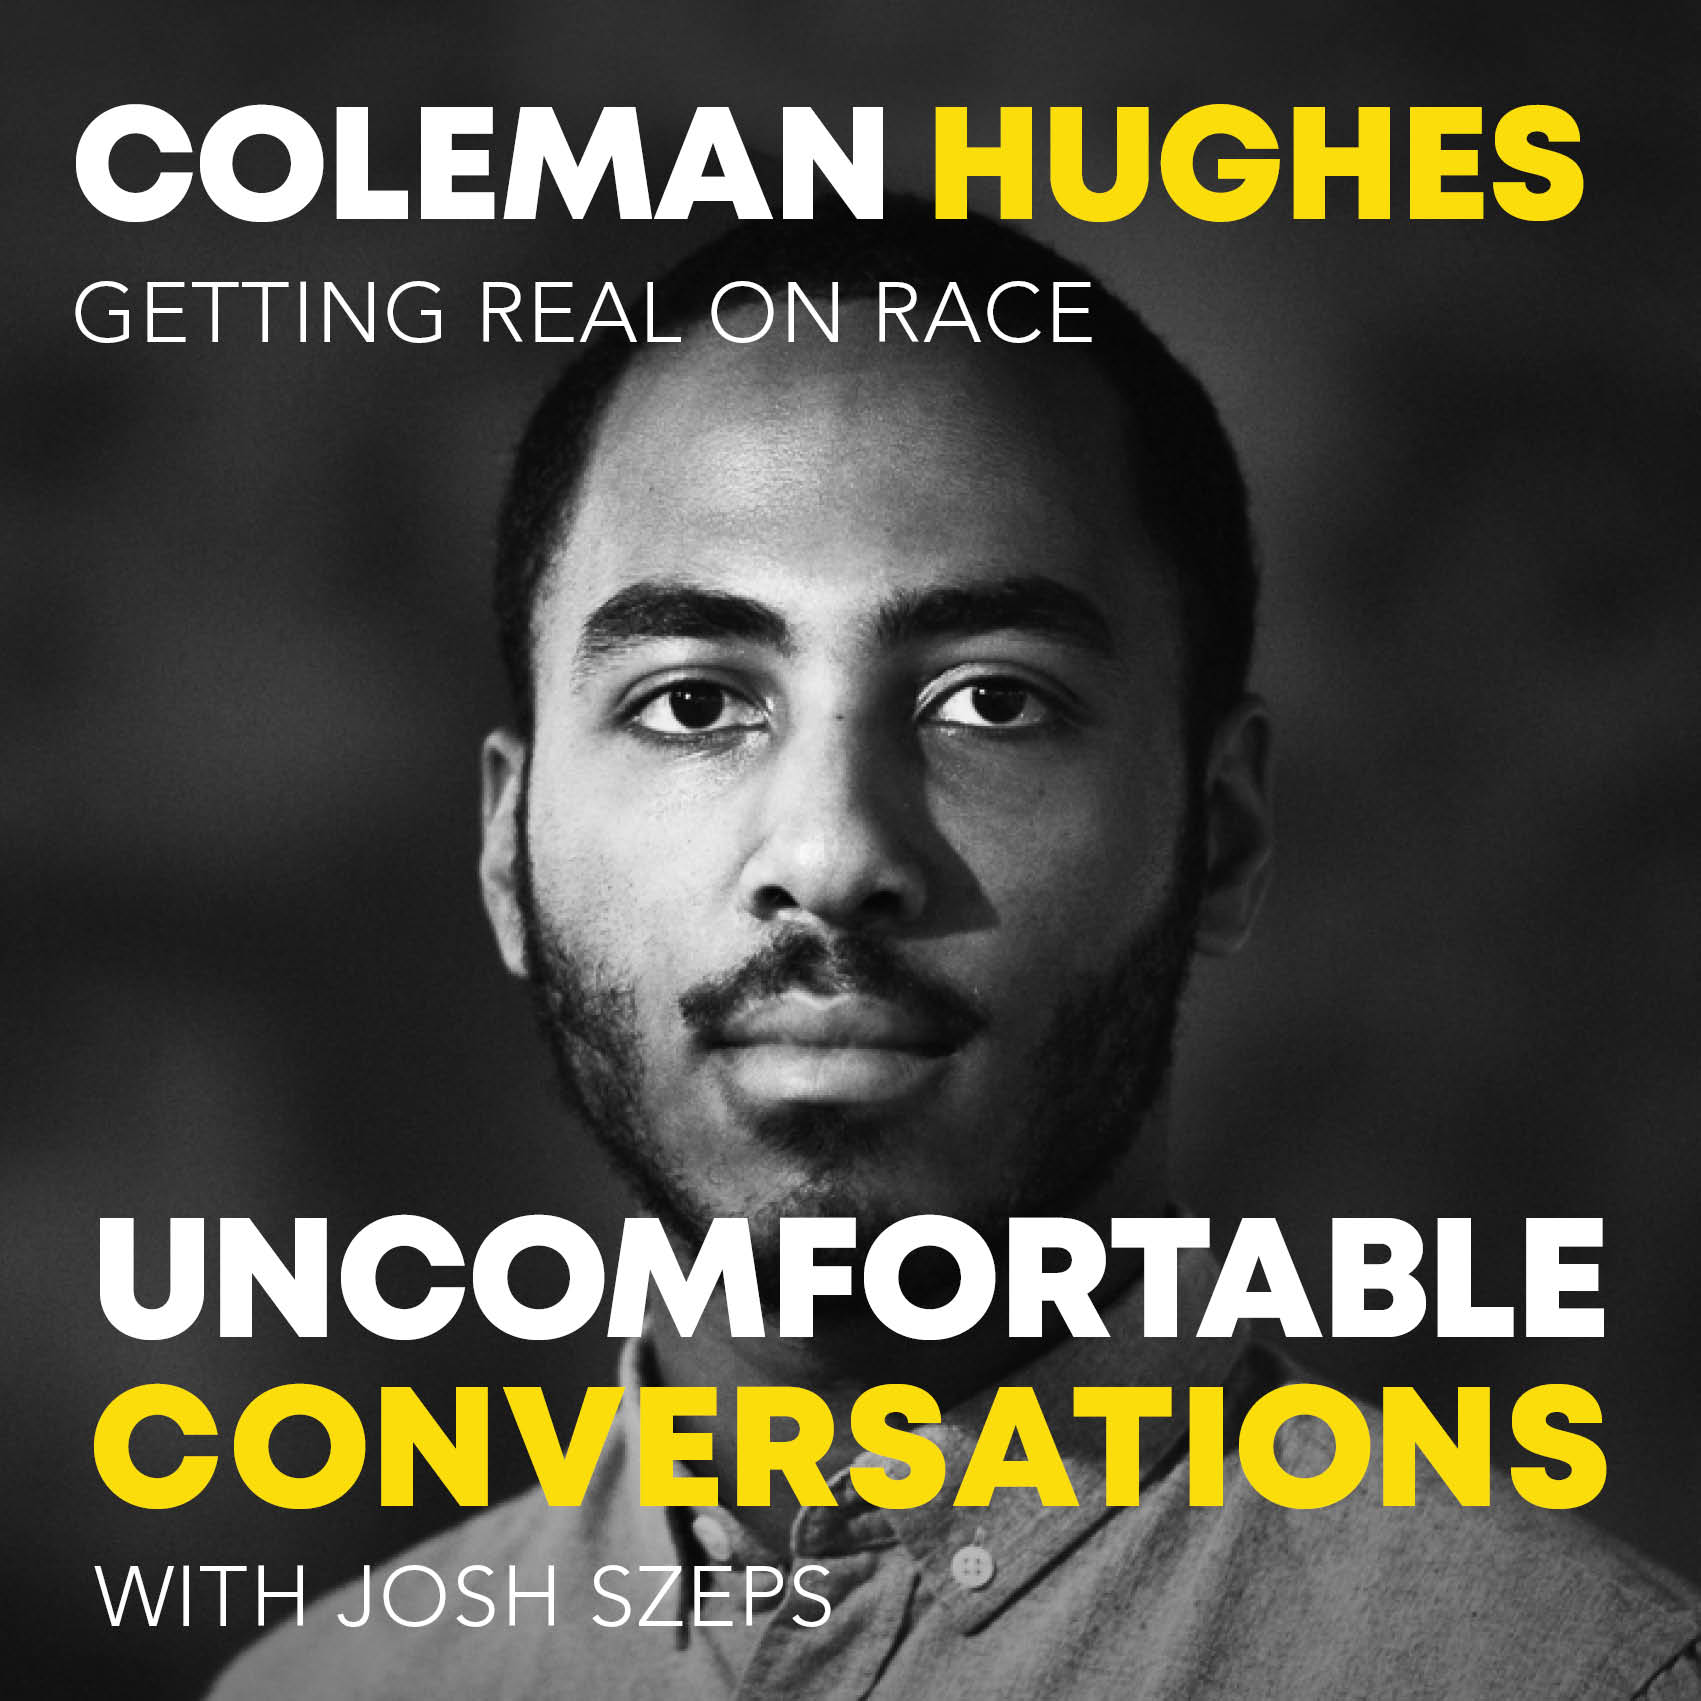 "Getting Real On Race" with Coleman Hughes